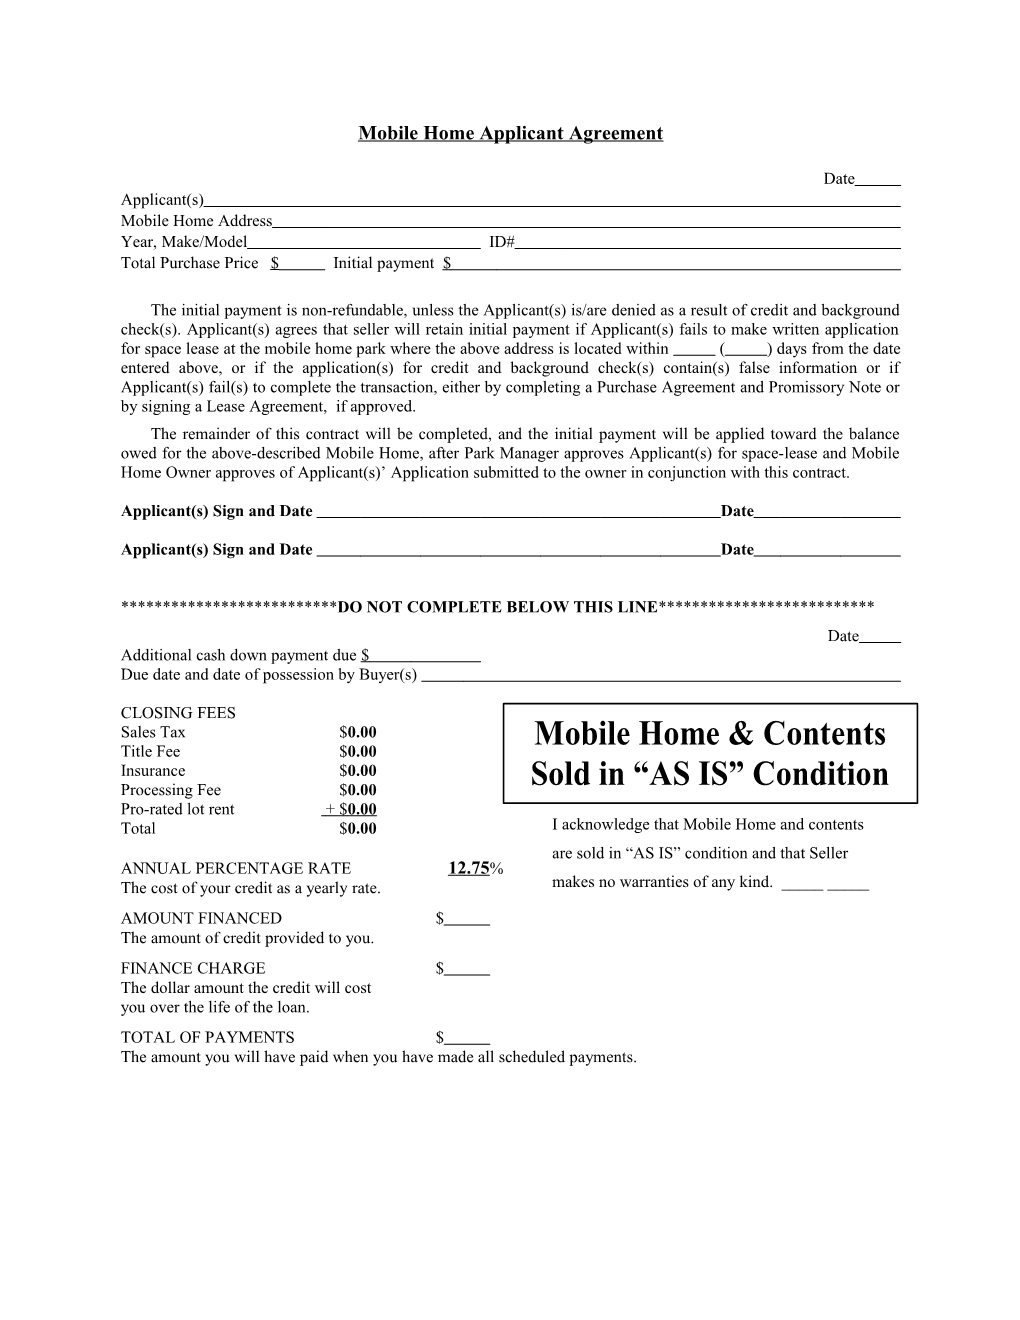 Mobile Home Purchase Agreement